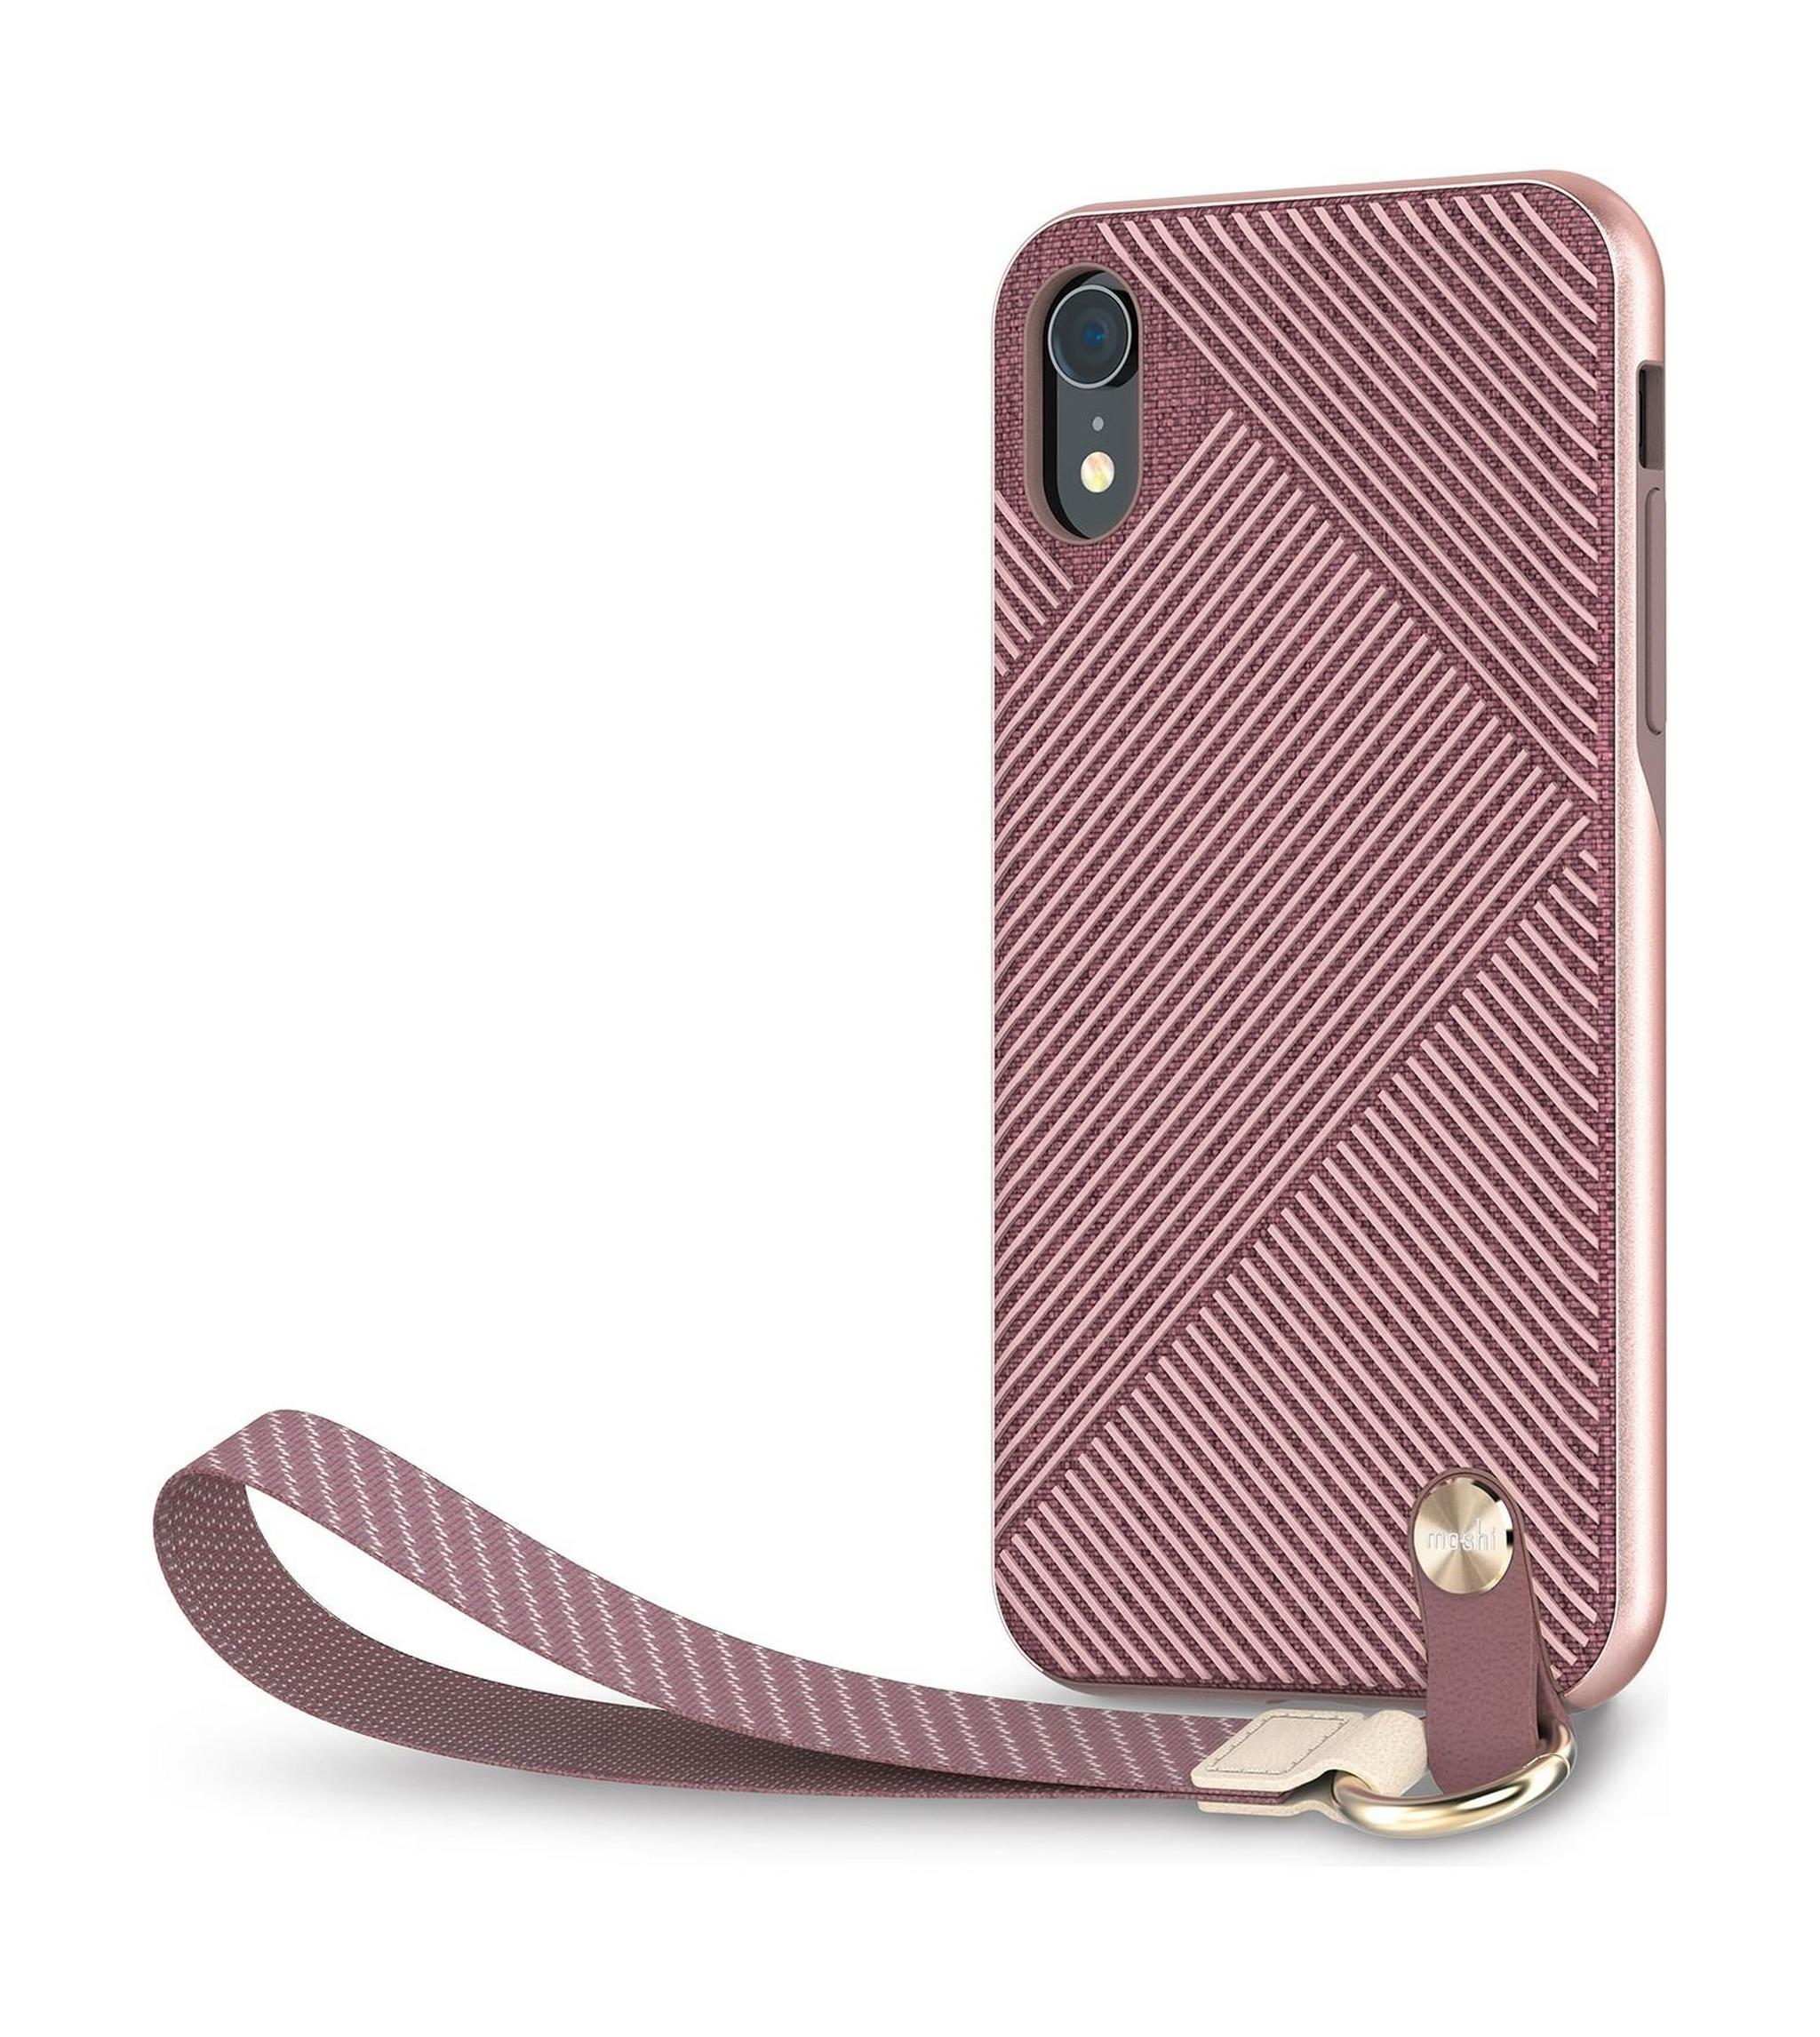 Moshi Altra Slim Protective Case with Wrist Strap for Apple iPhone XR - Pink